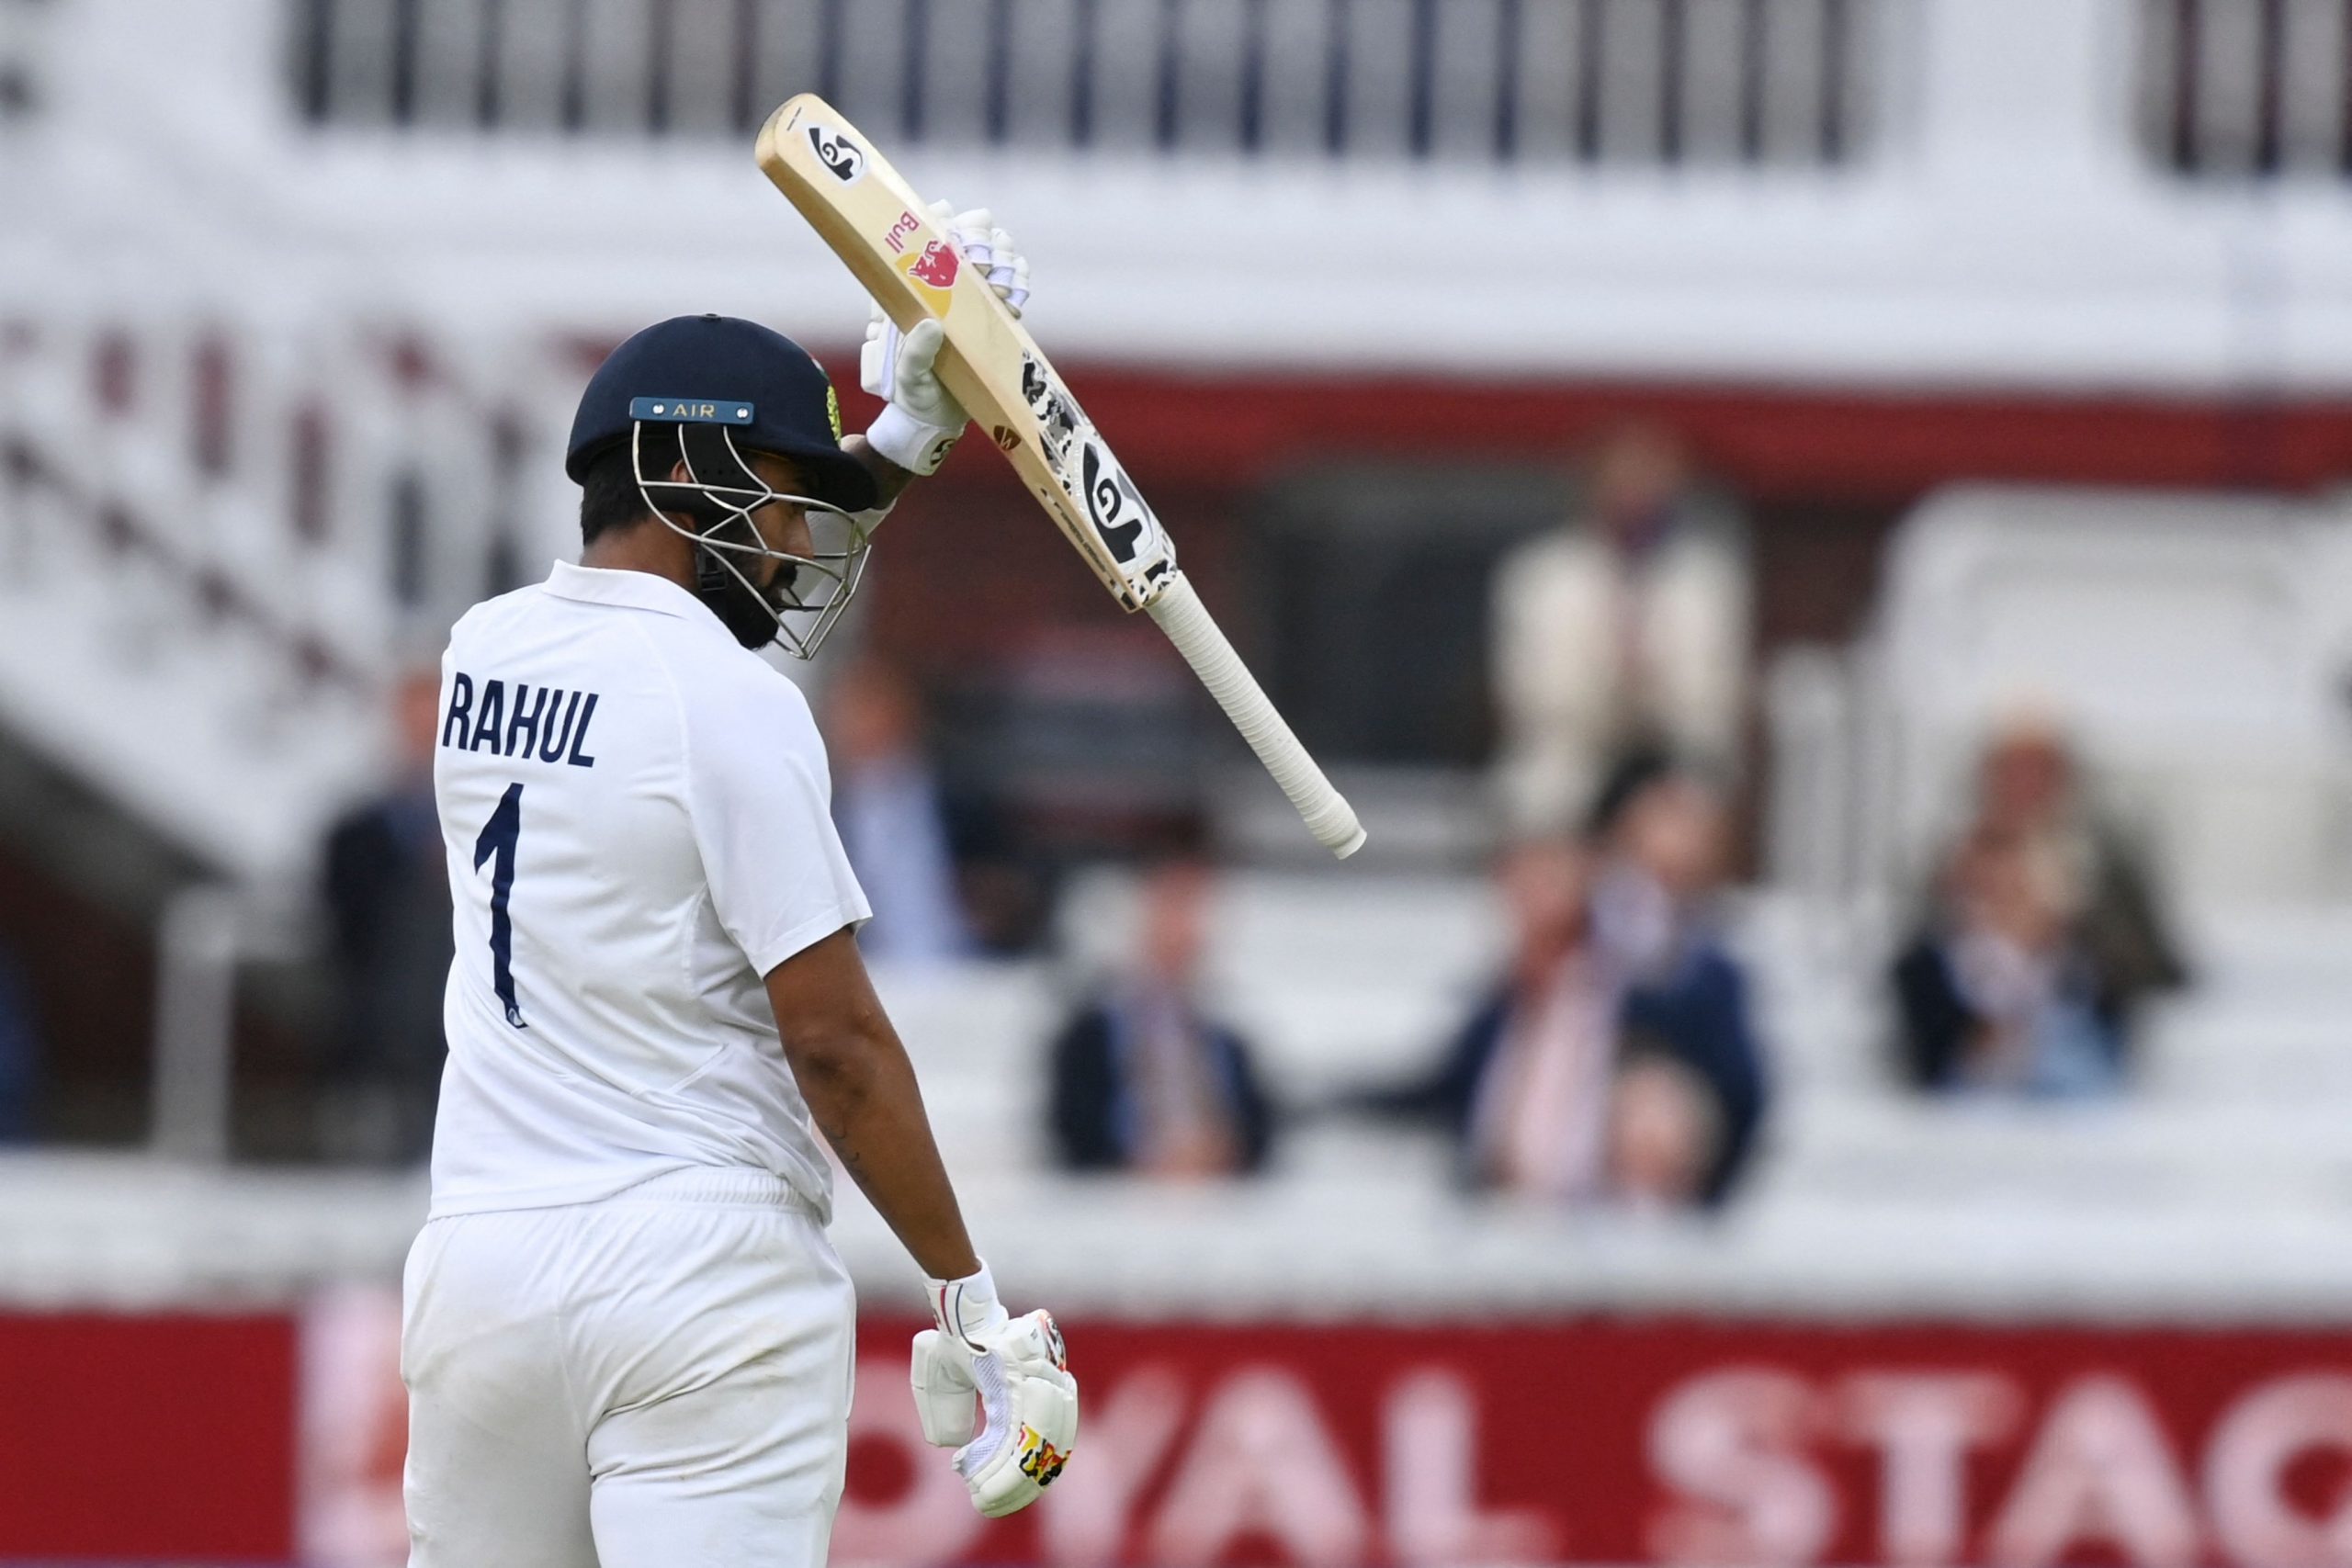 ENG vs IND 2021, 2nd Test, Day 1 Report: KL Rahul’s Ton Secures India’s Day At Lord’s